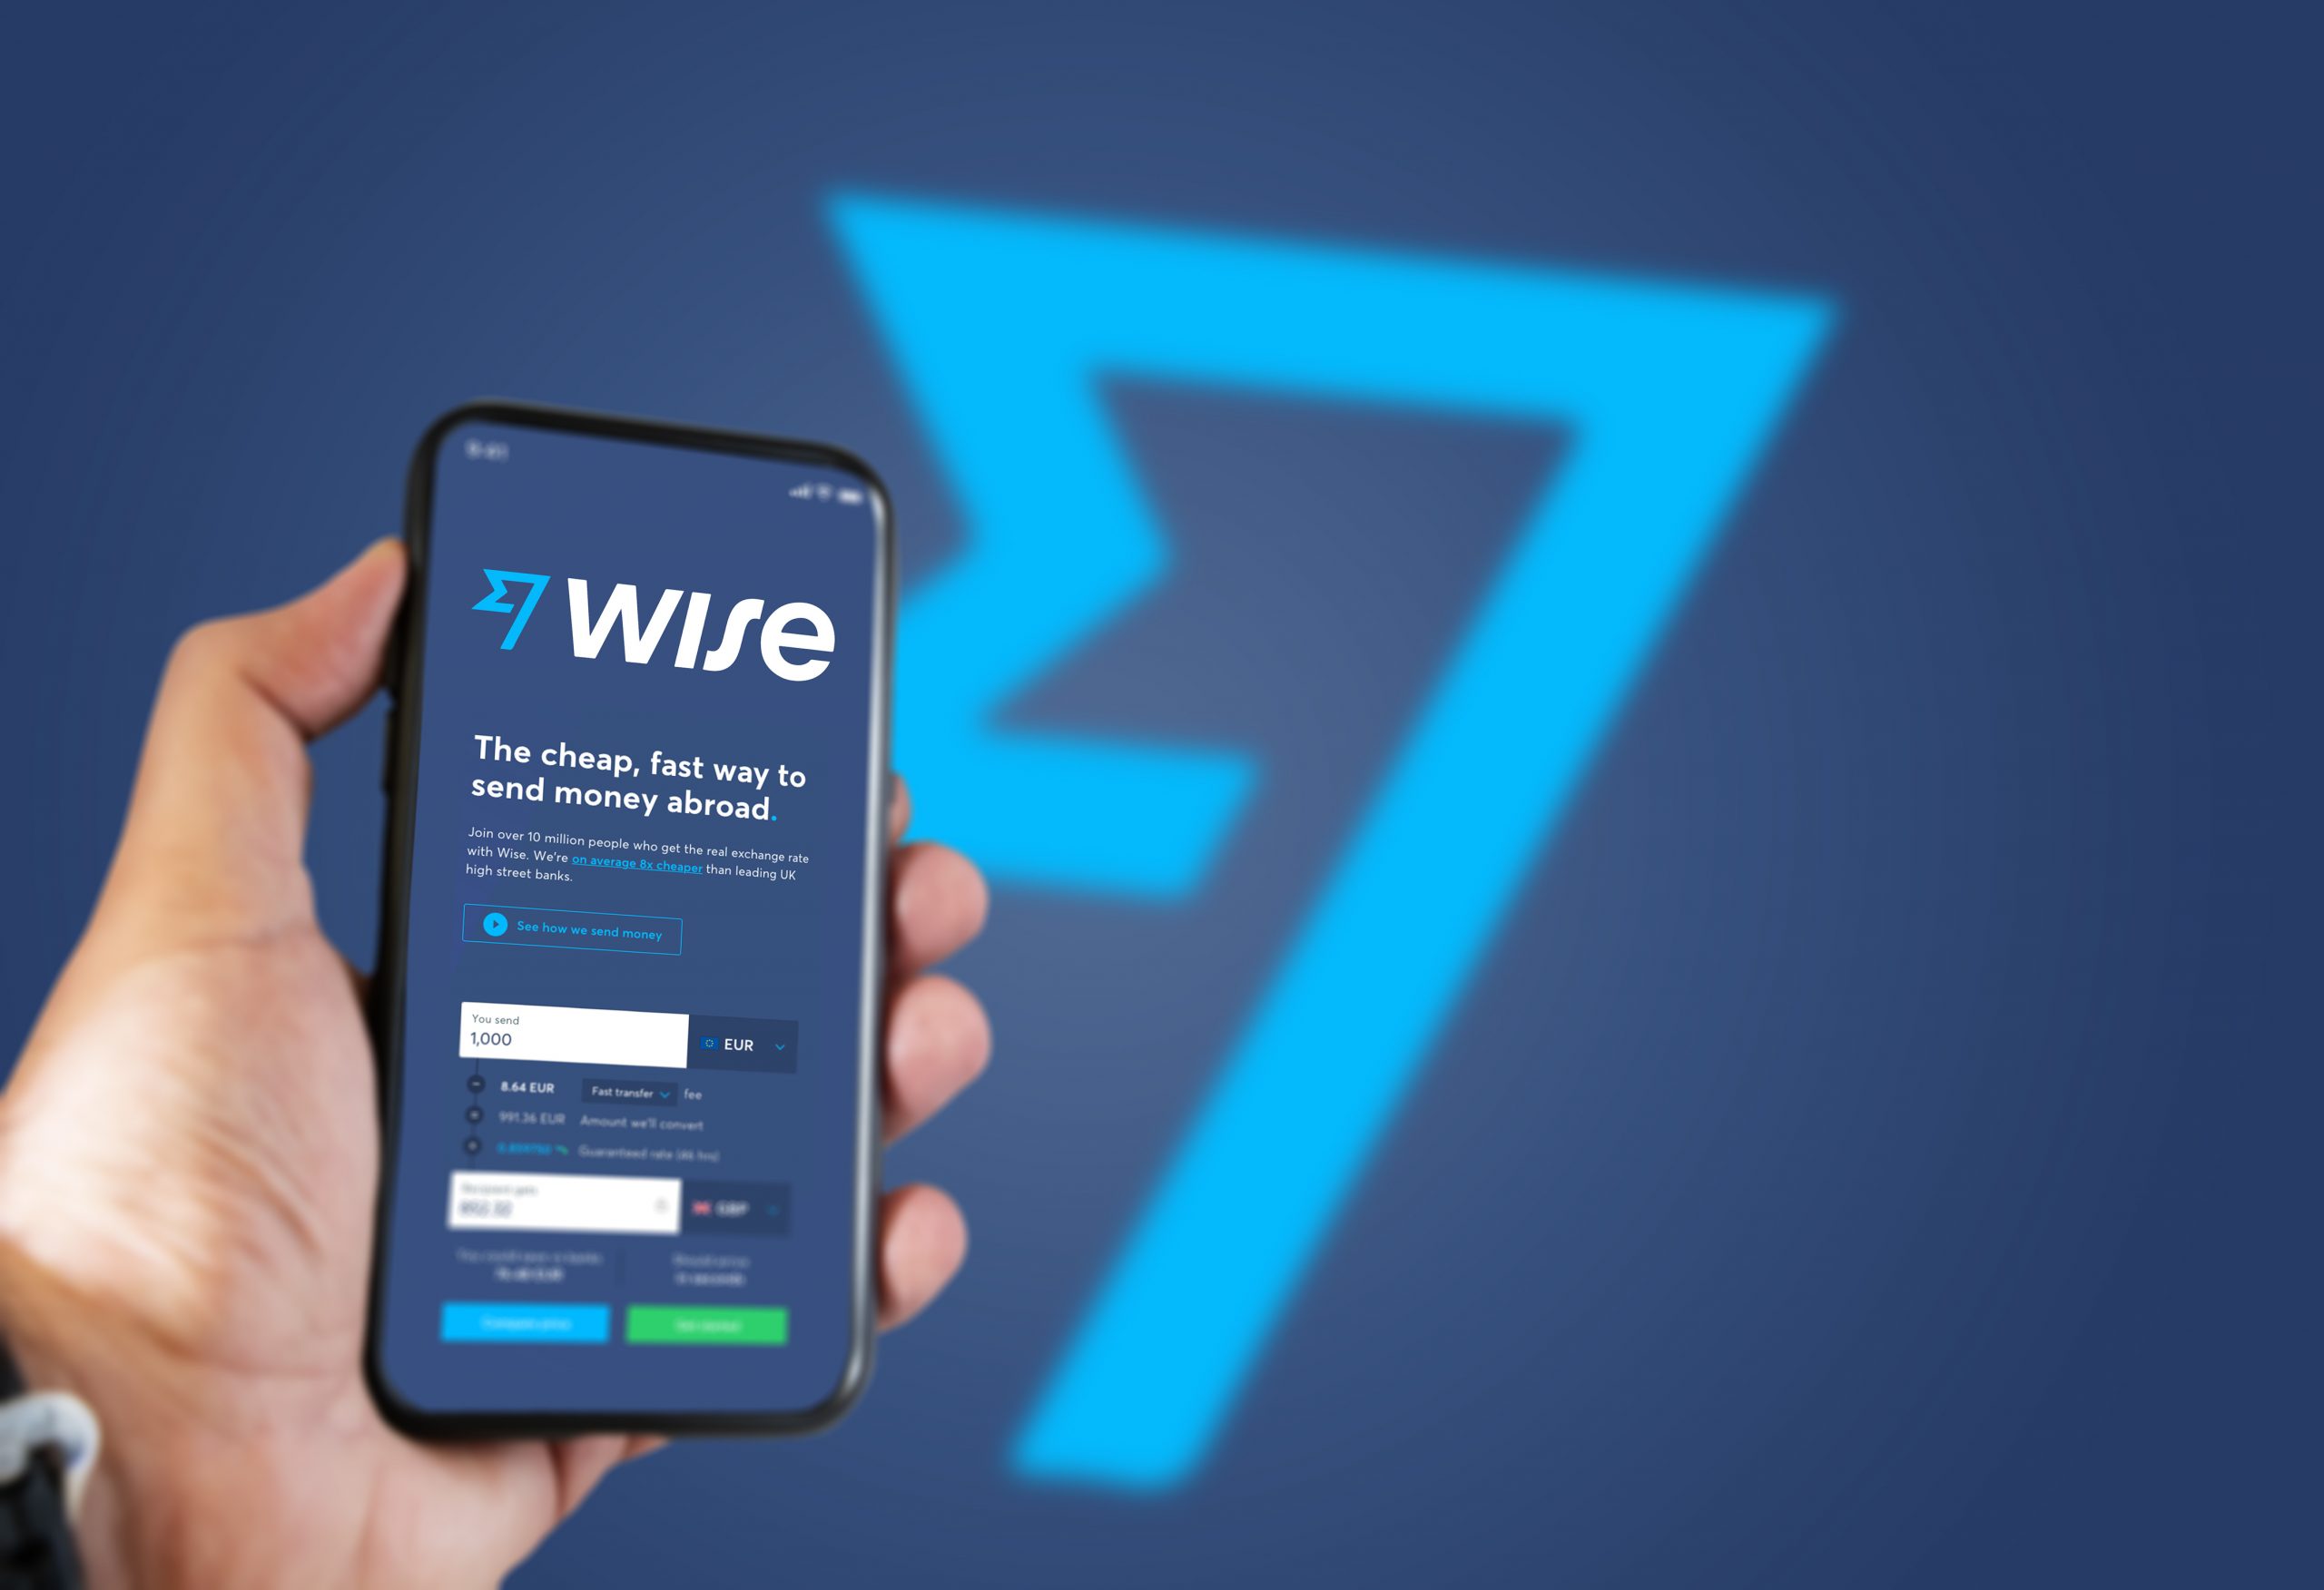 Wise, the new name for TransferWise